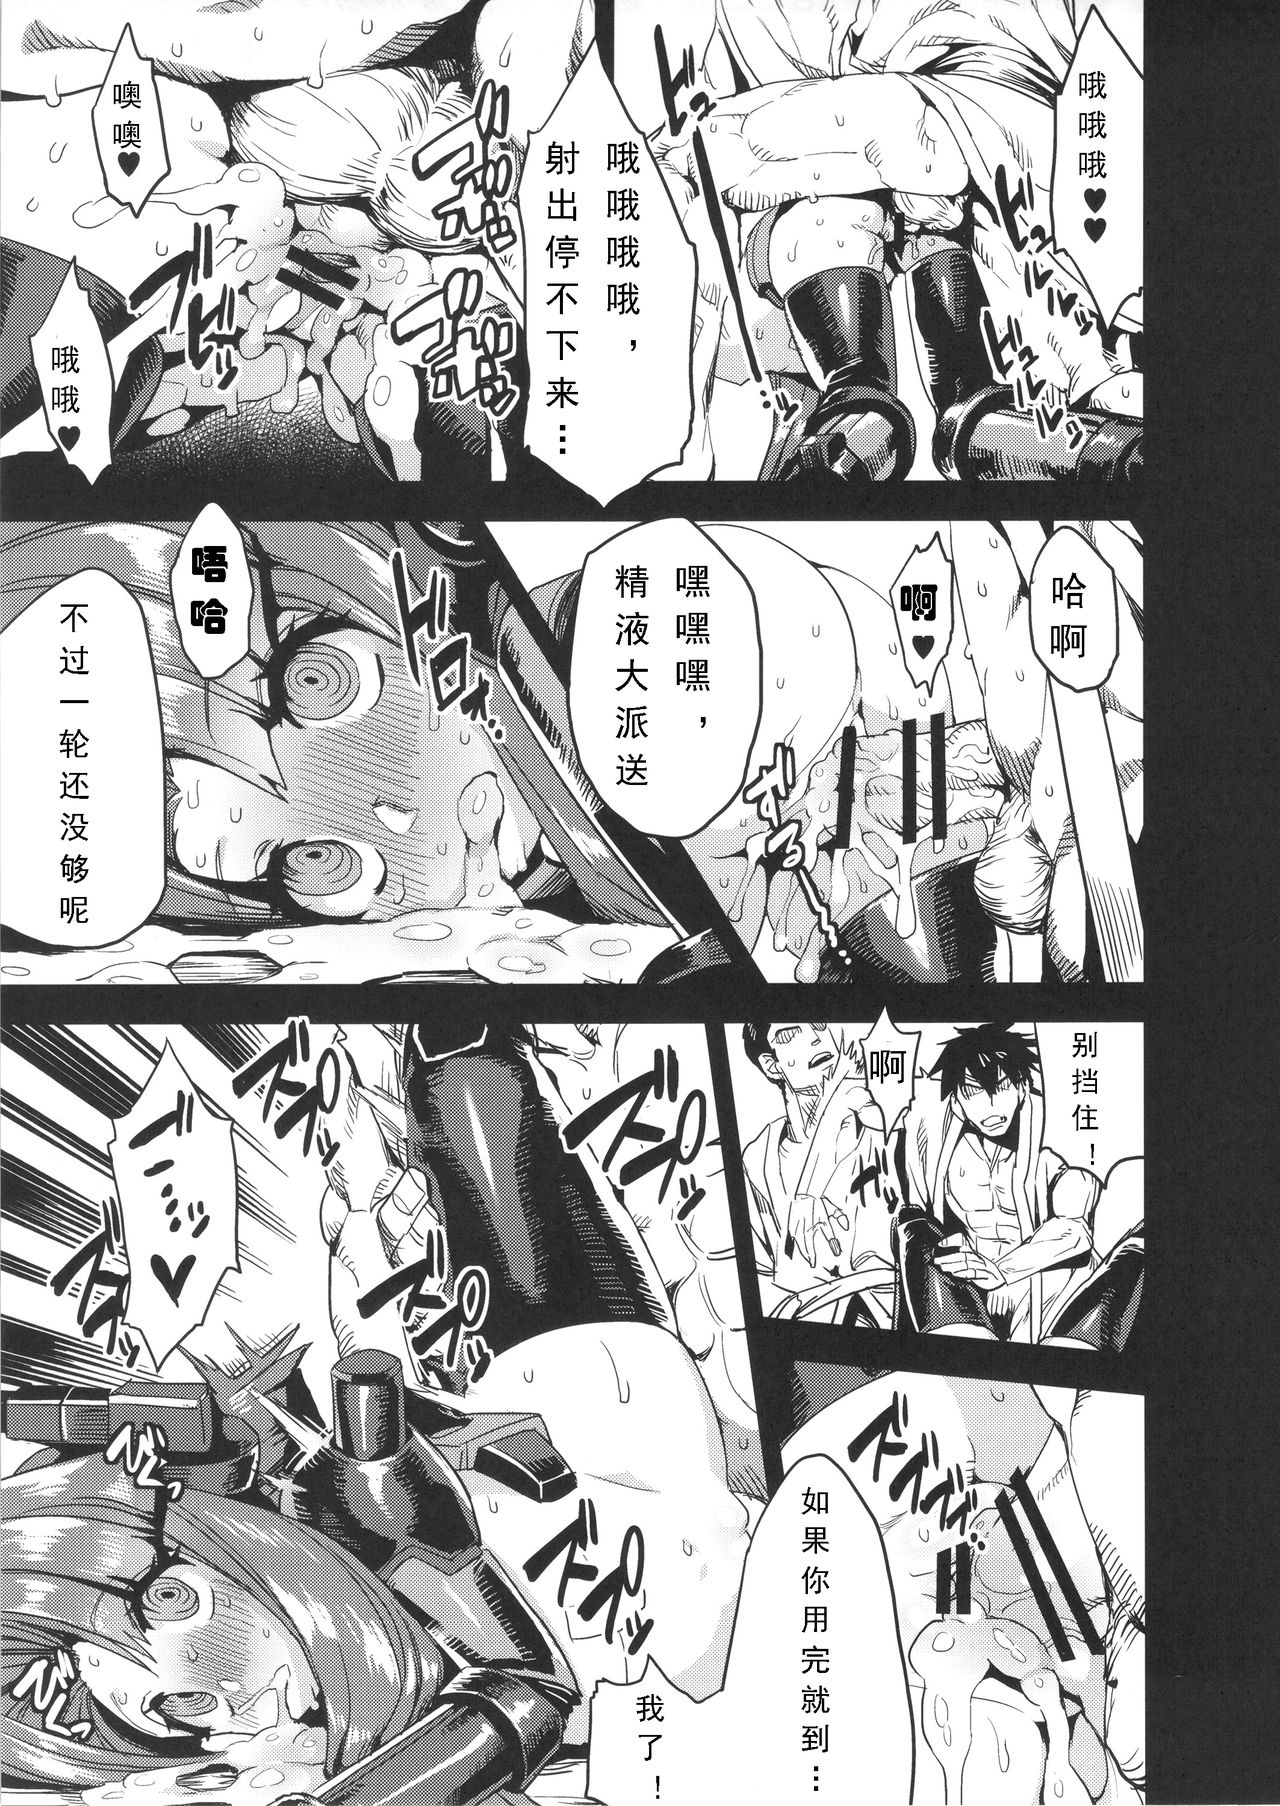 (C89) [OVing (Obui)] Hentai Marionette 4 (Saber Marionette J) [Chinese] [可乐个人汉化] page 17 full